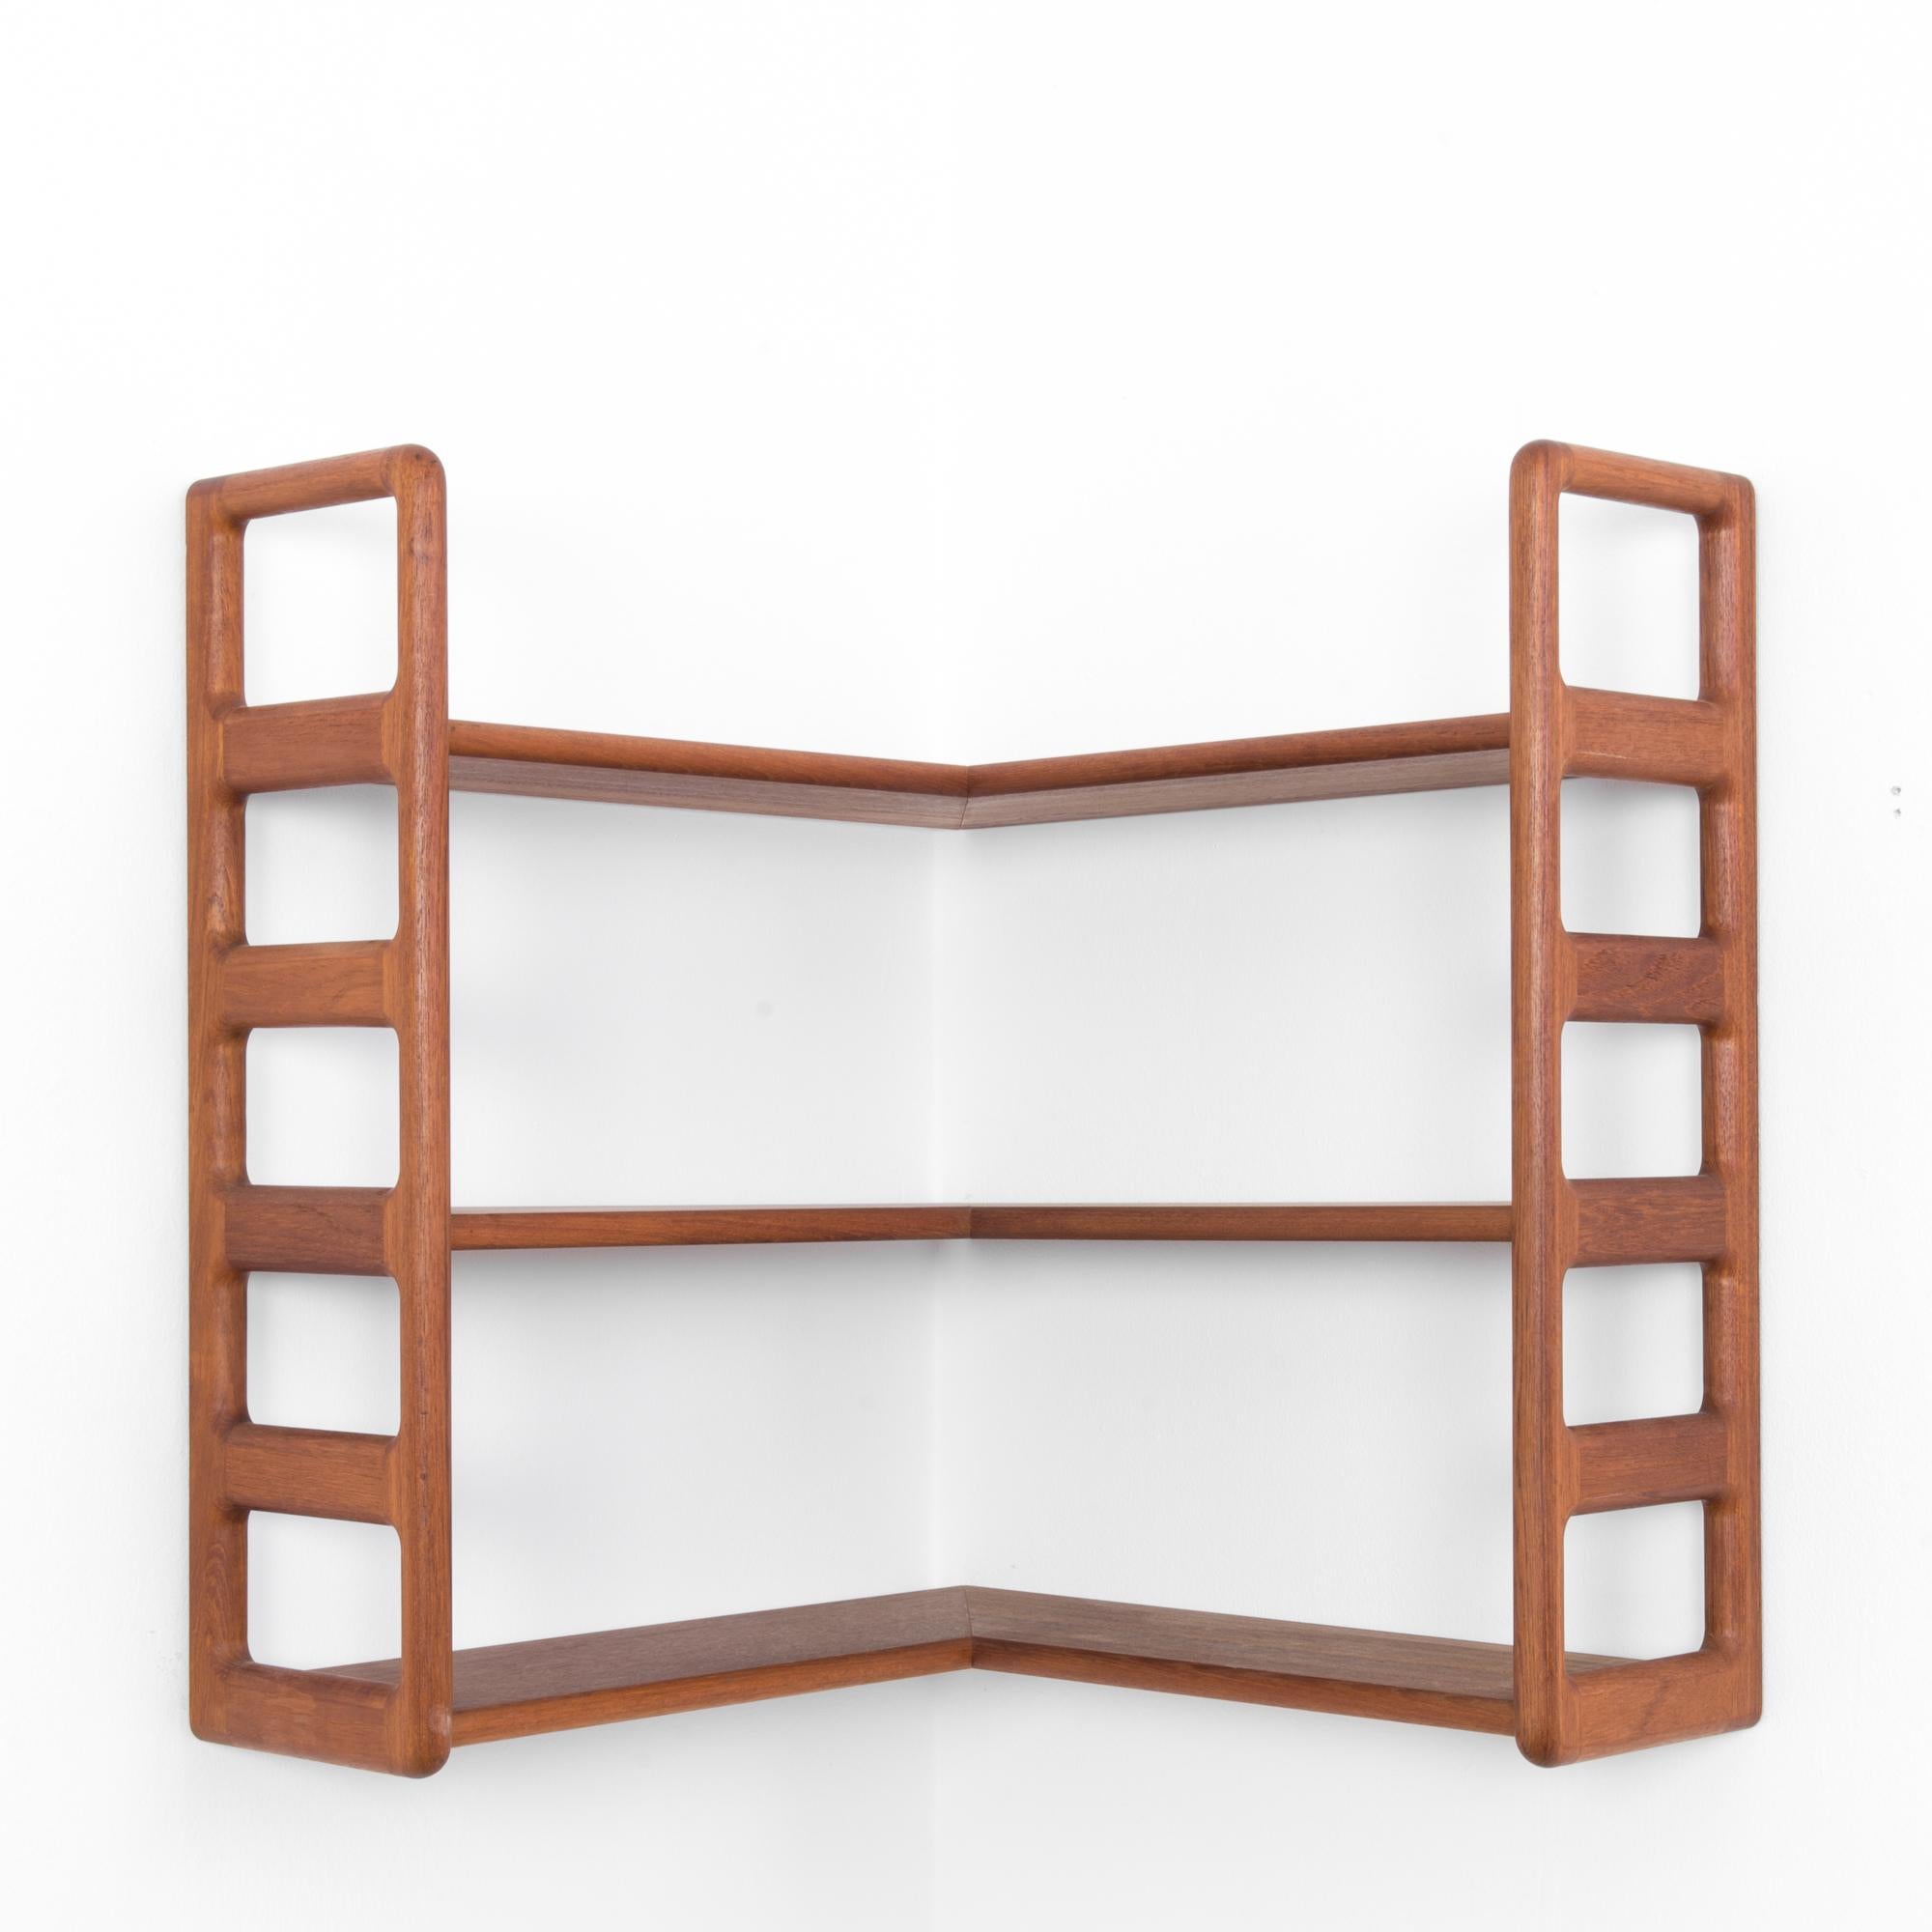 This teak corner wall shelf with a warm tone and beautiful wood grain was made in Denmark, circa 1960. This piece features three shelves and ladder-like ends. Rounded edges balance the clean lines of the shelf, showcasing the refined elegance of